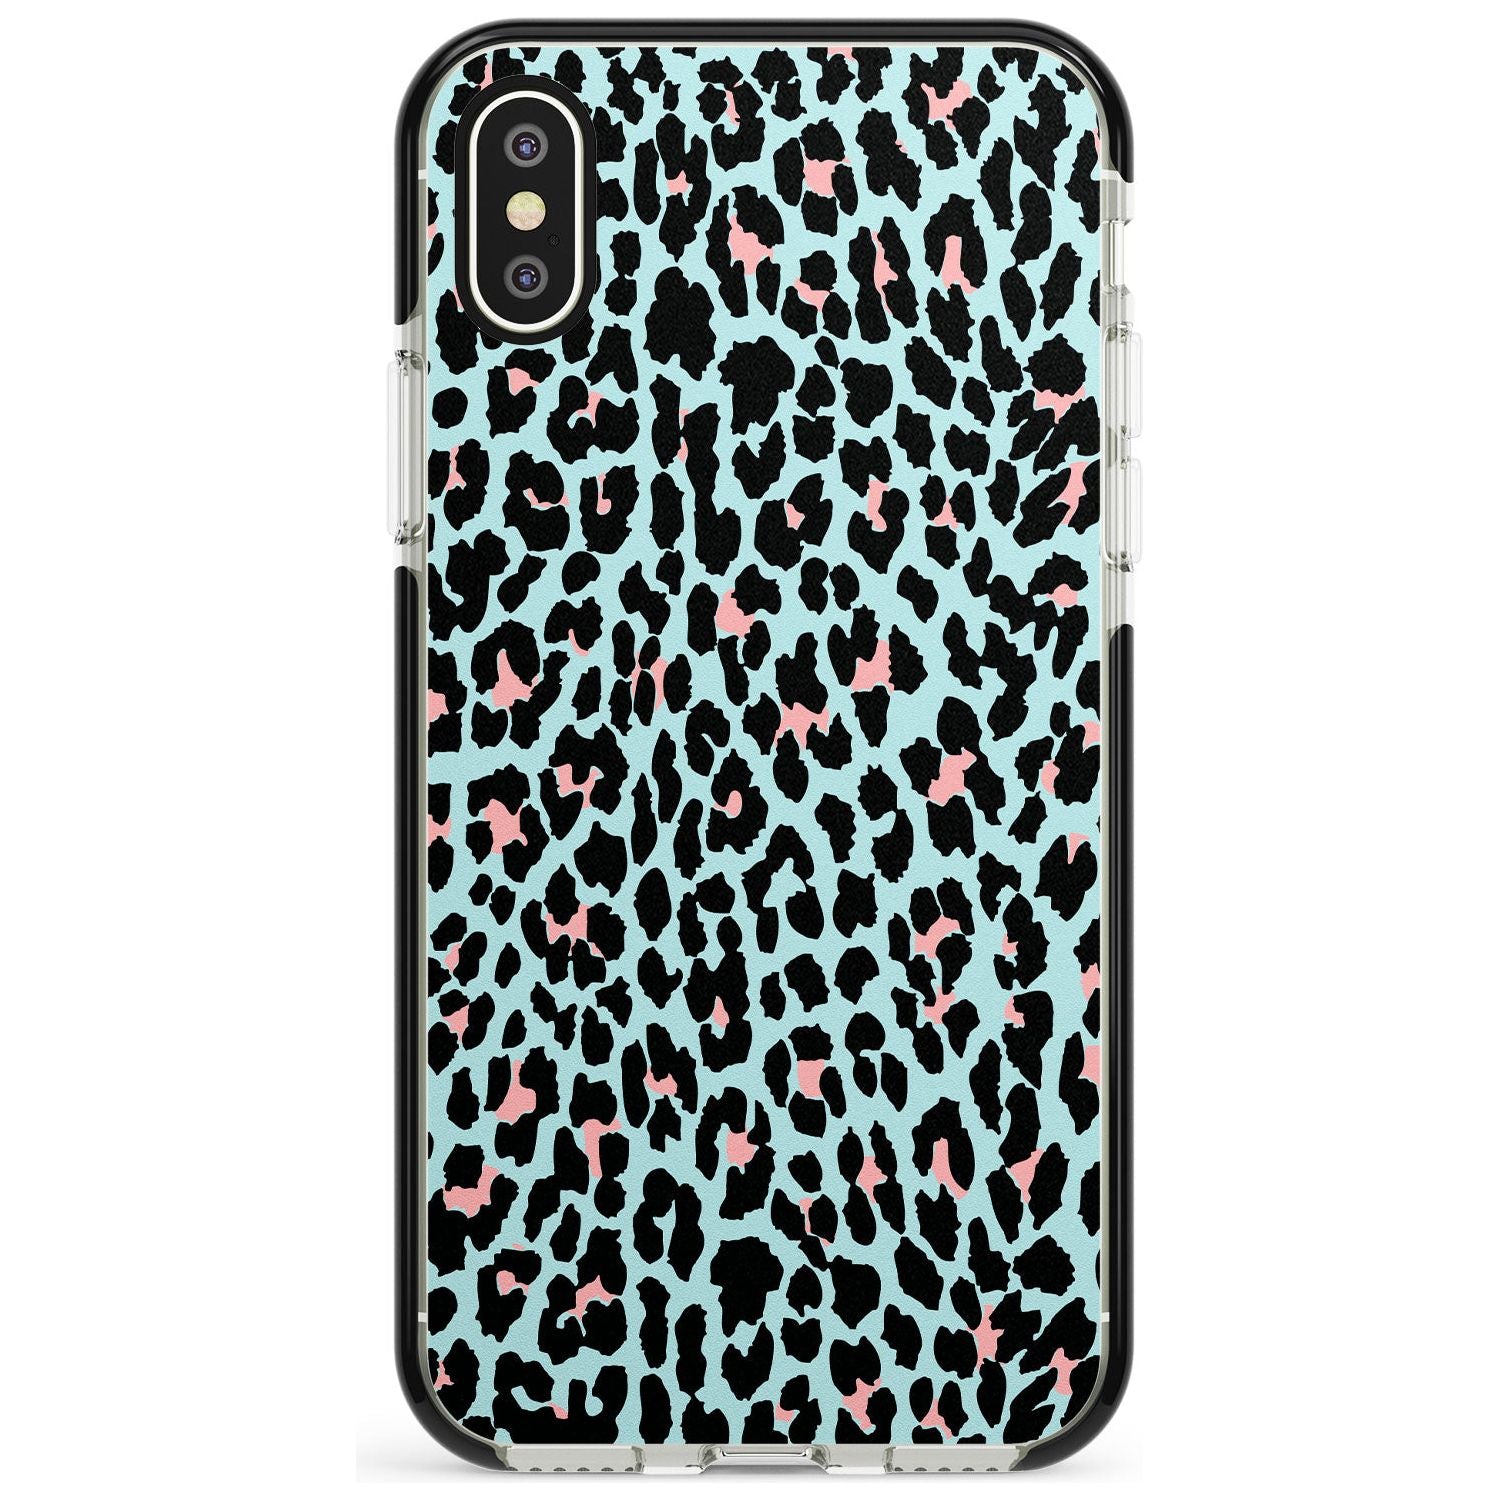 Light Pink on Blue Leopard Print Pattern Black Impact Phone Case for iPhone X XS Max XR